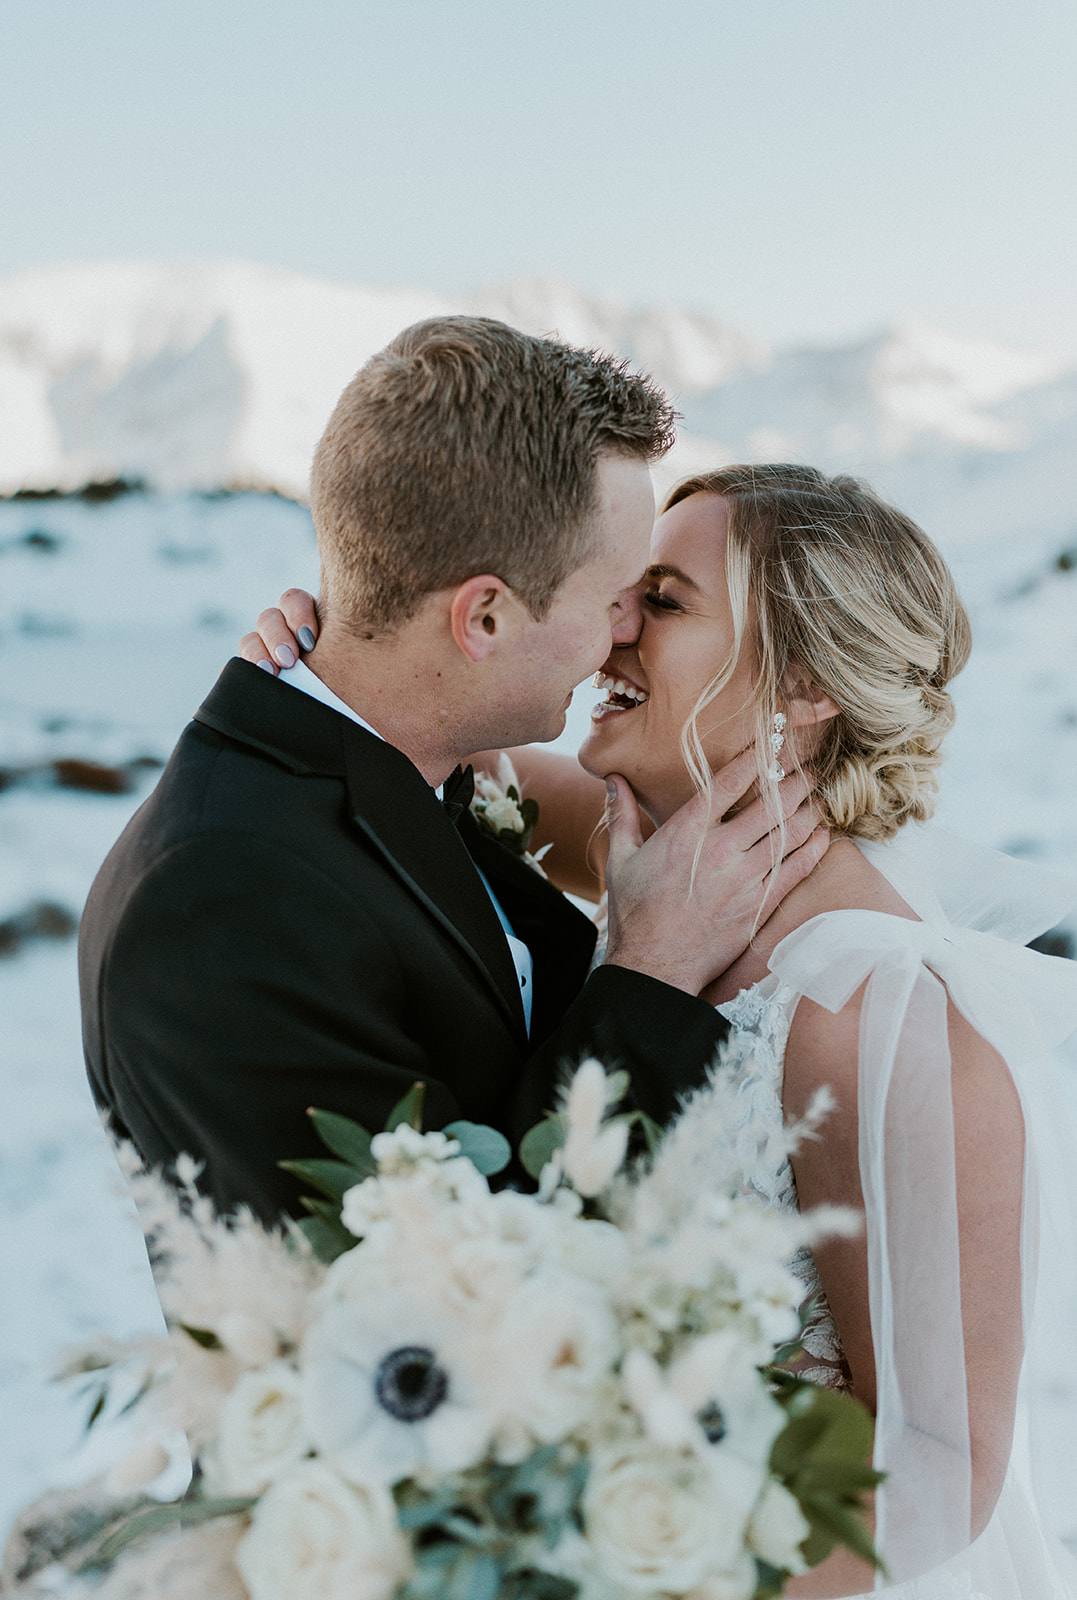 Newlyweds laugh their way to a kiss while standing in a snowy mountain trail